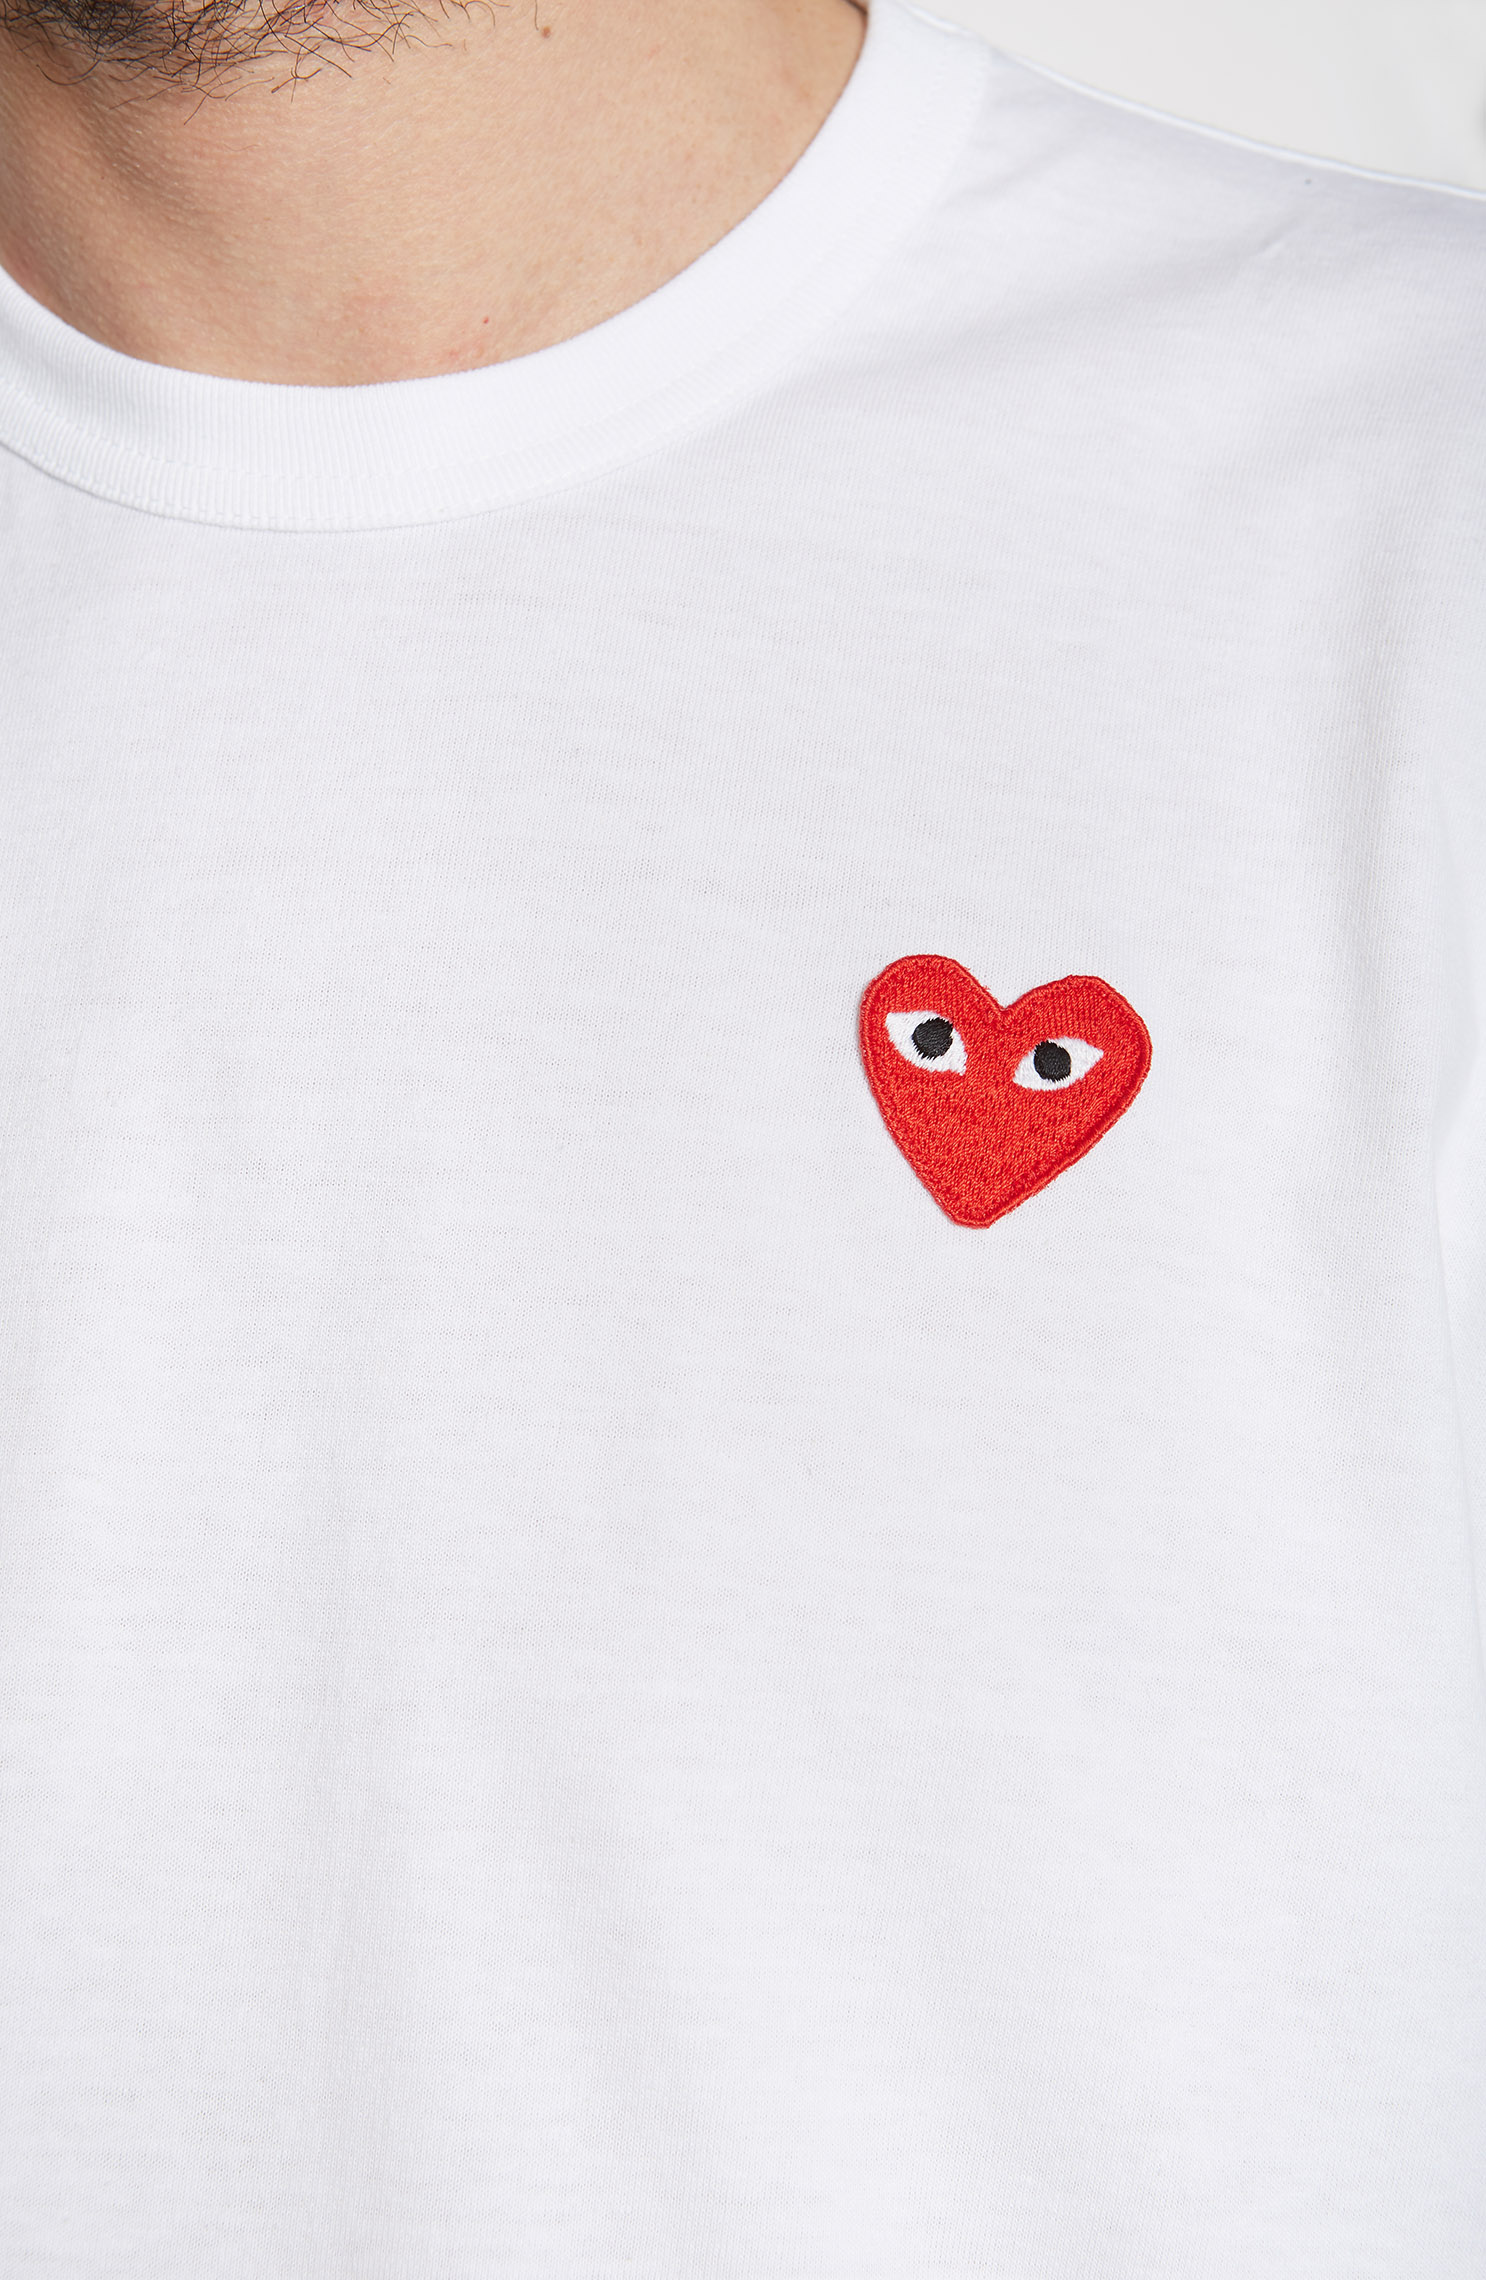 Comme Des Garcons - White t-shirt with red - Schwittenberg